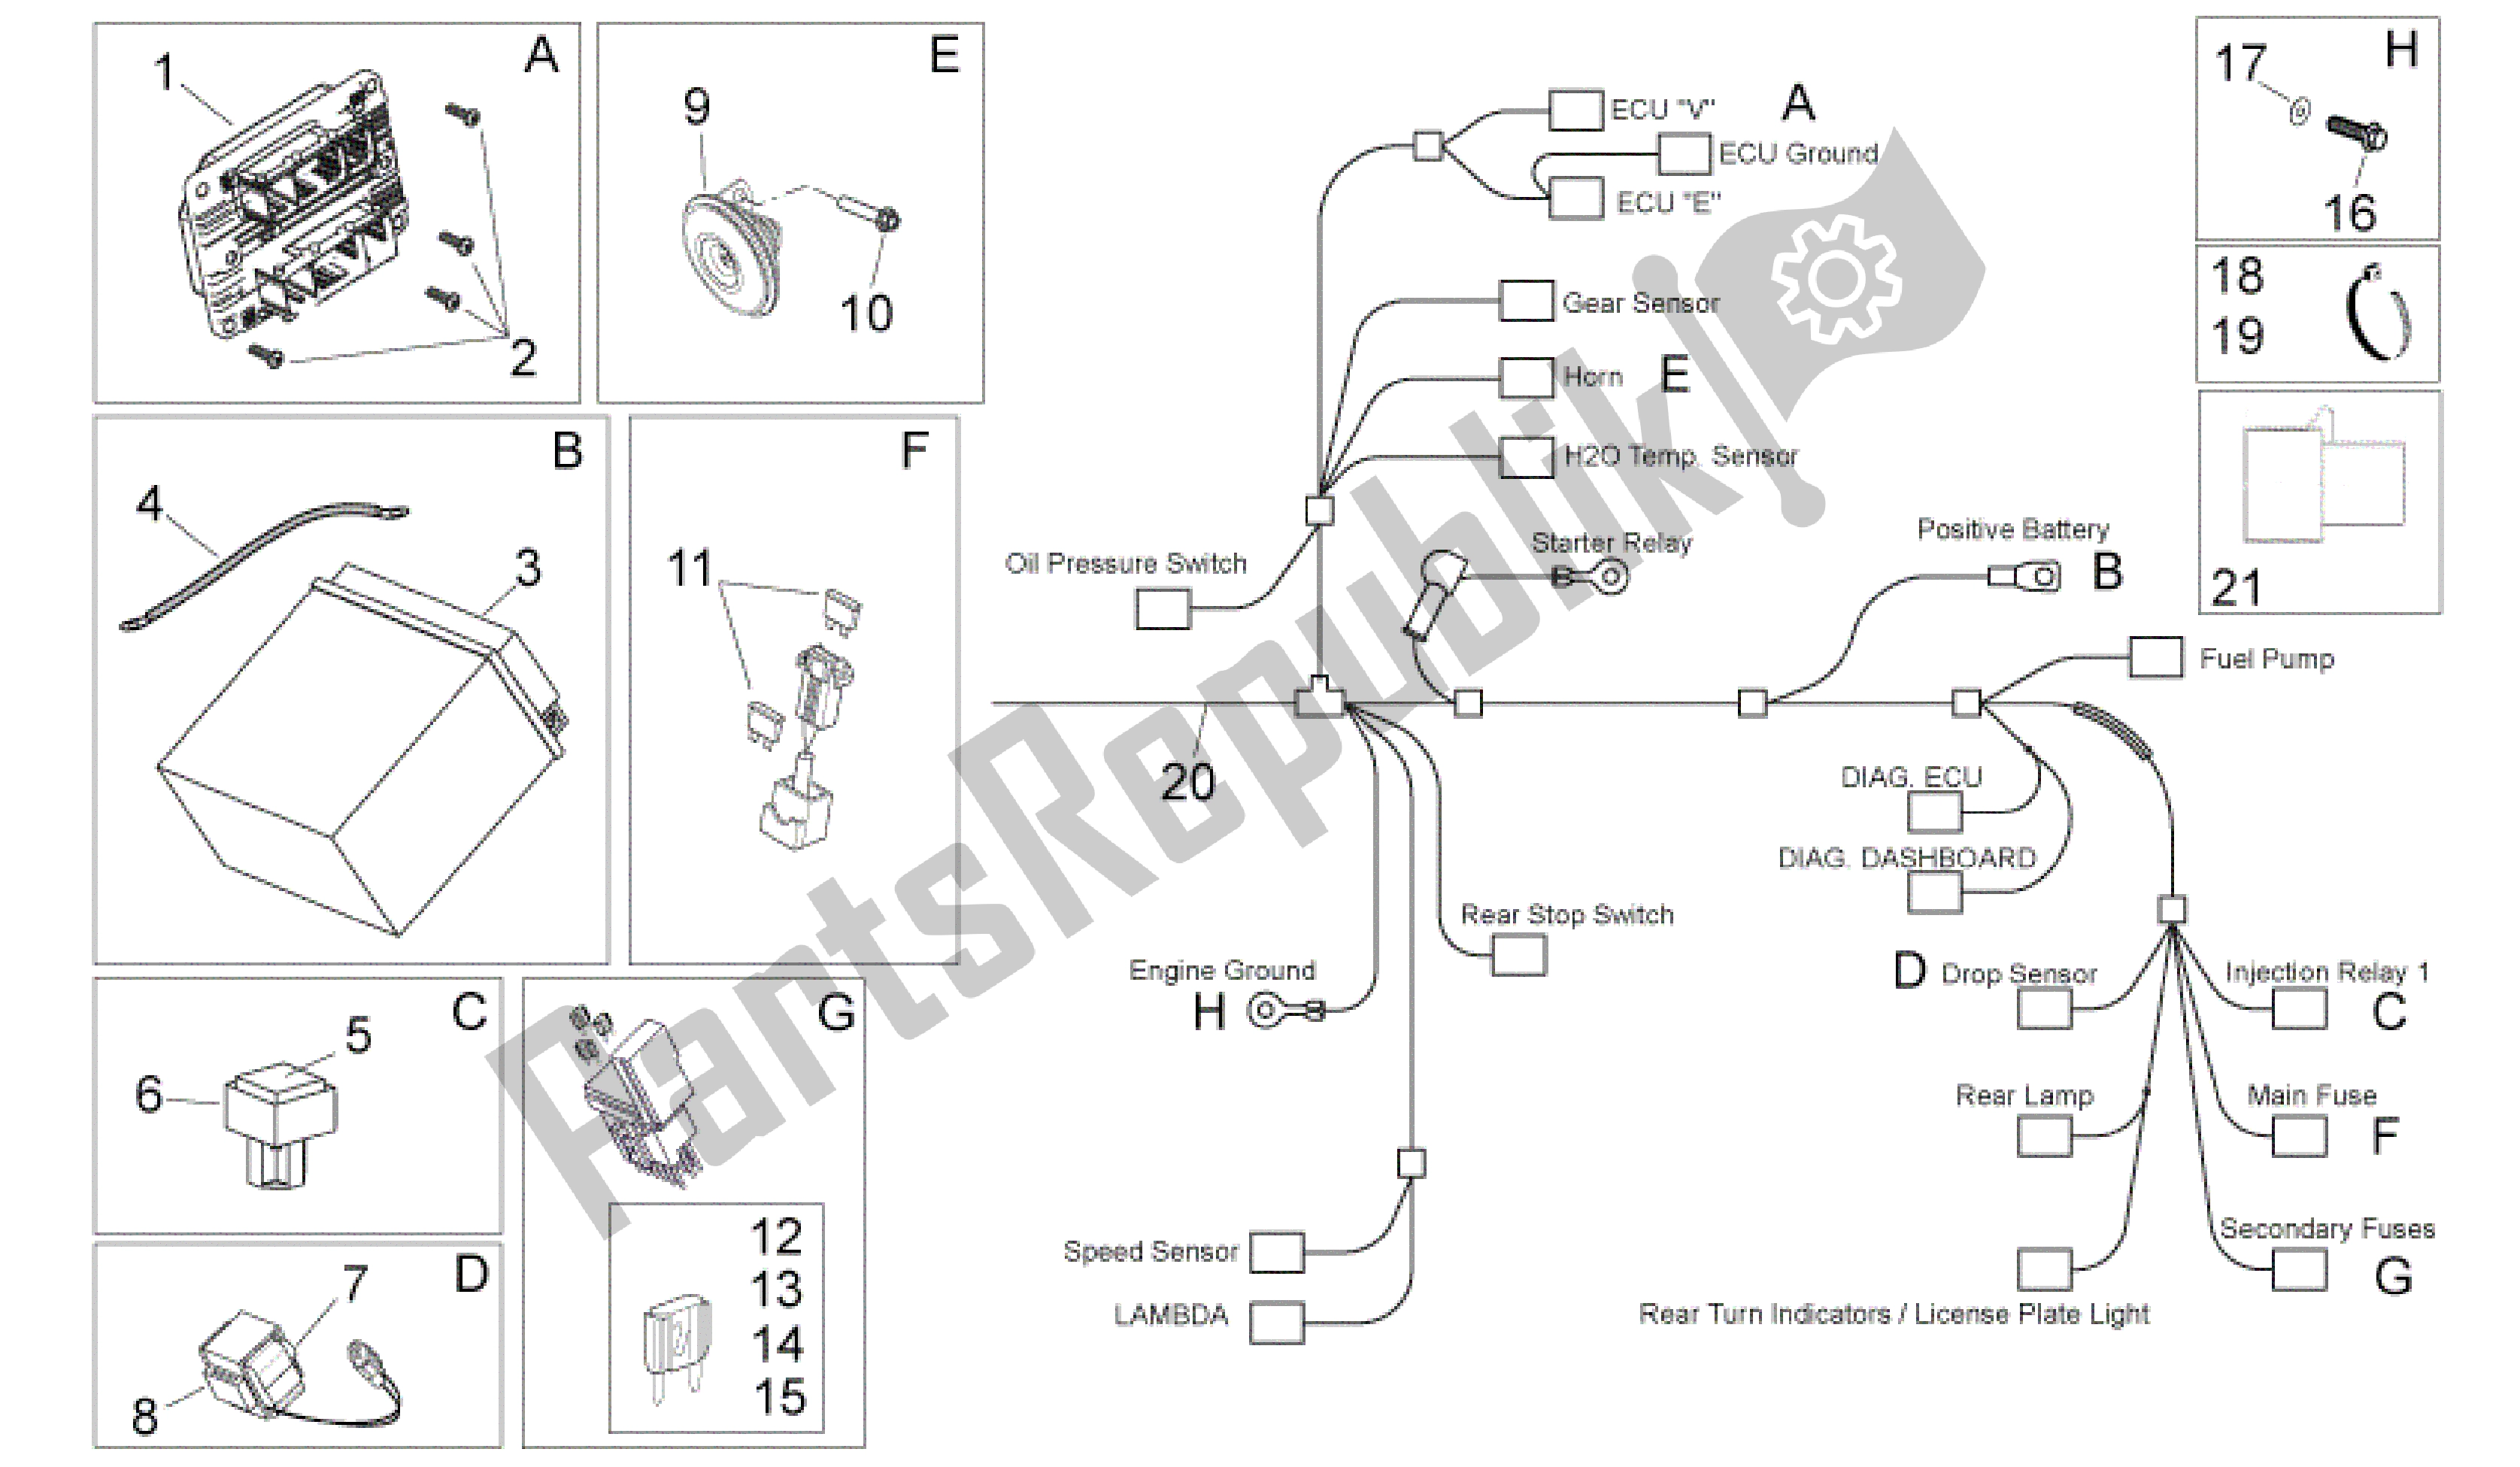 All parts for the Electrical System Ii of the Aprilia Shiver 750 2011 - 2013